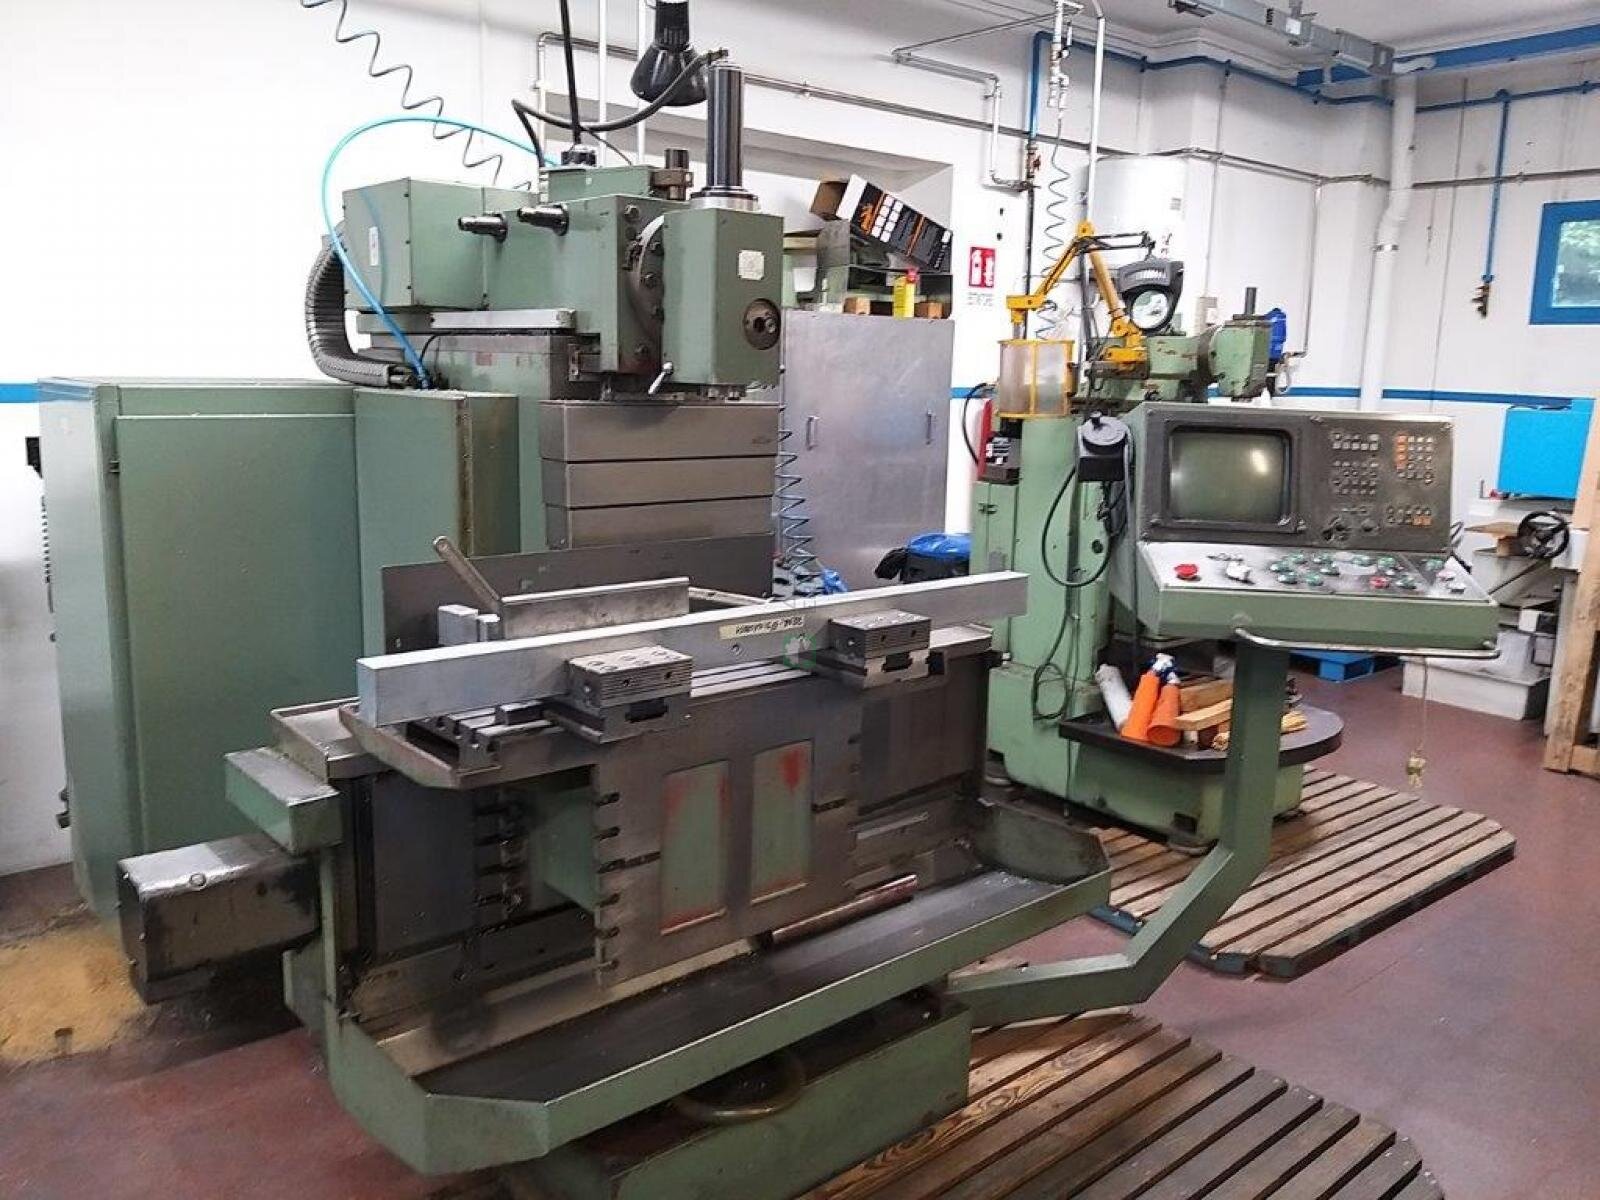 tos-celakovice-fng-40-cnc-milling-machine